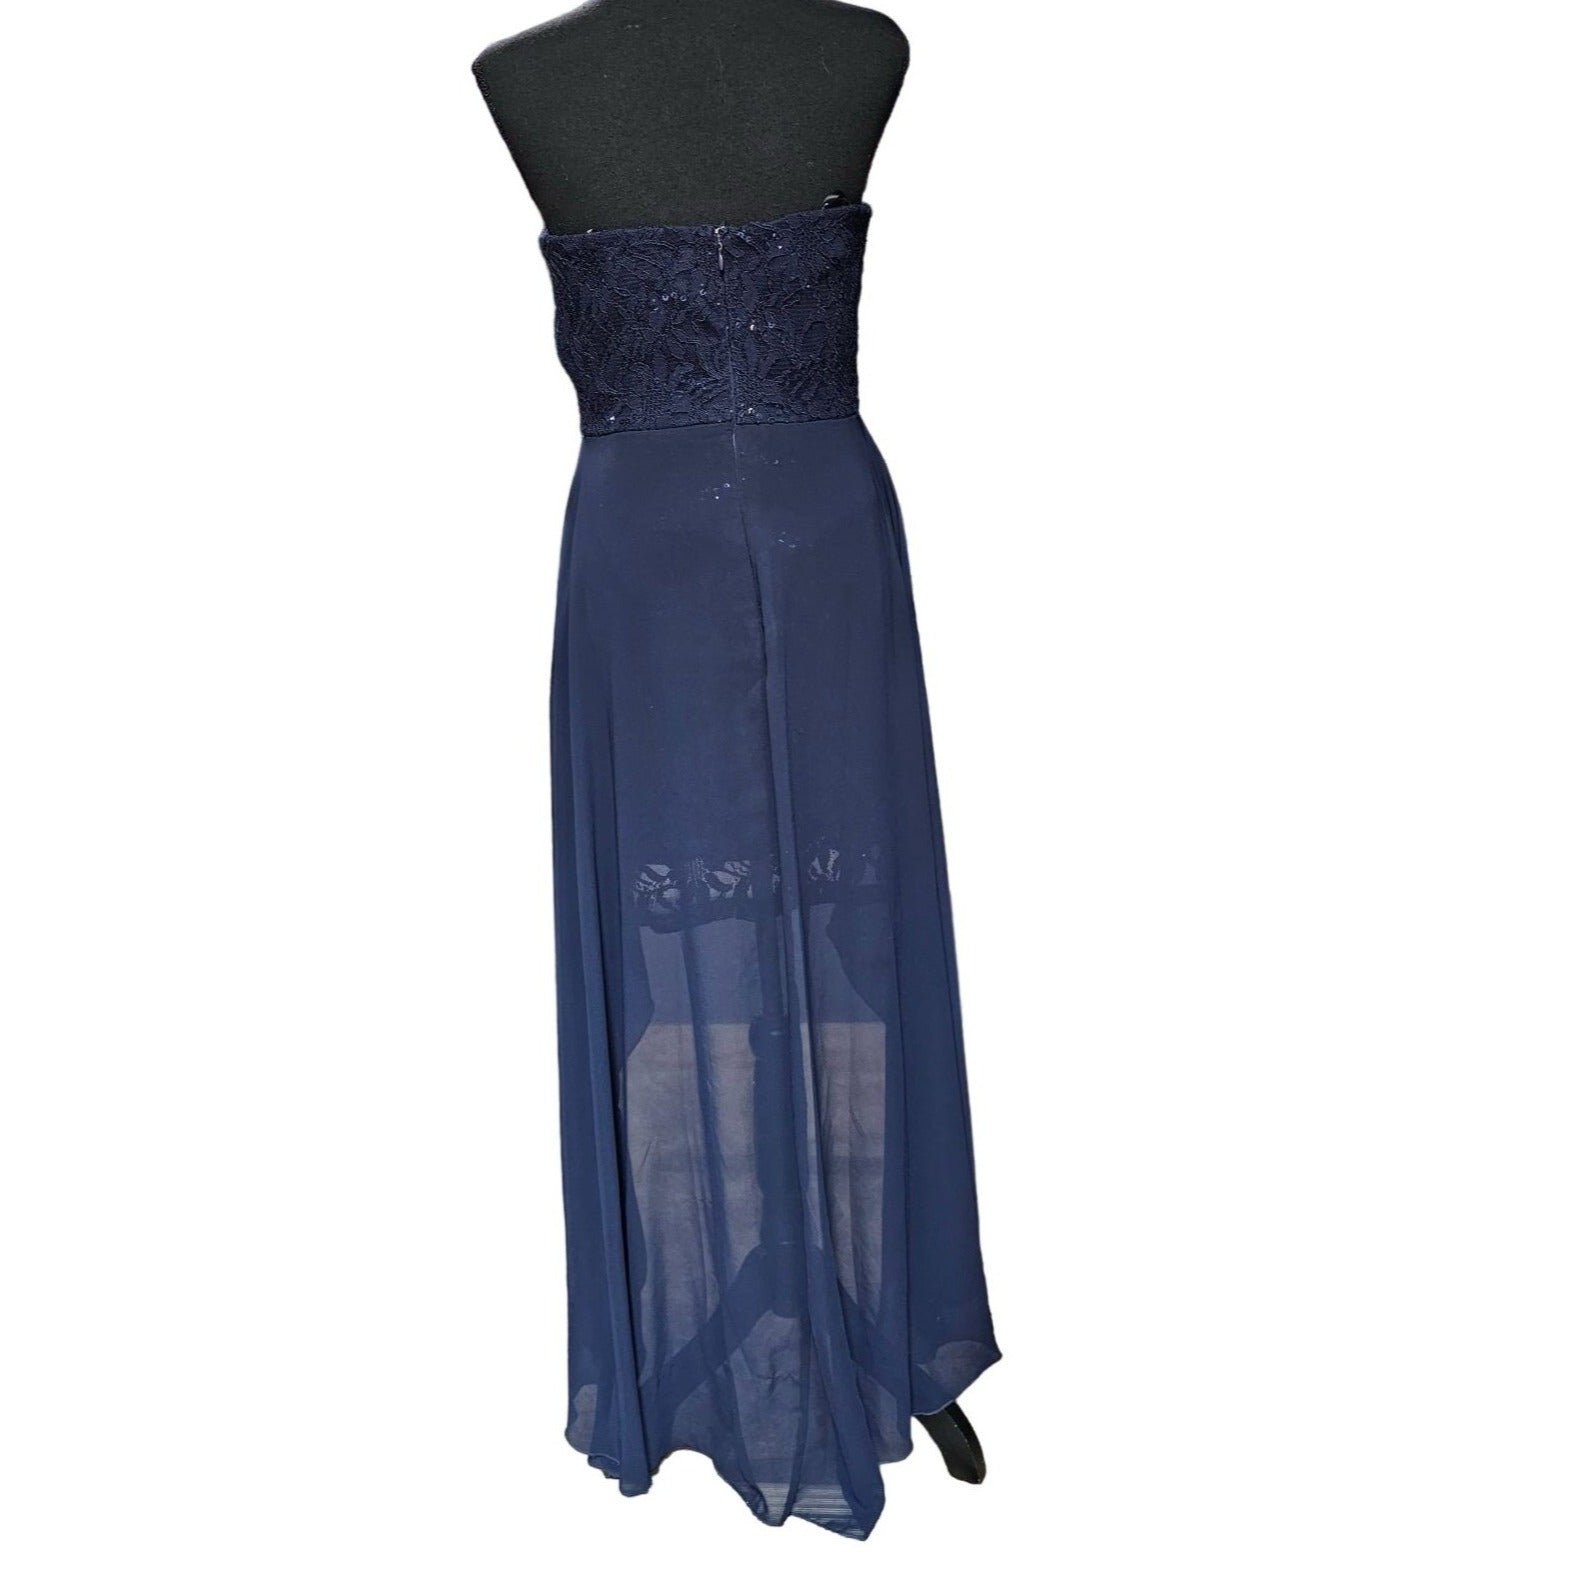 Xtraordinary Junior's Strapless High-low Navy Blue Gown, Size 7